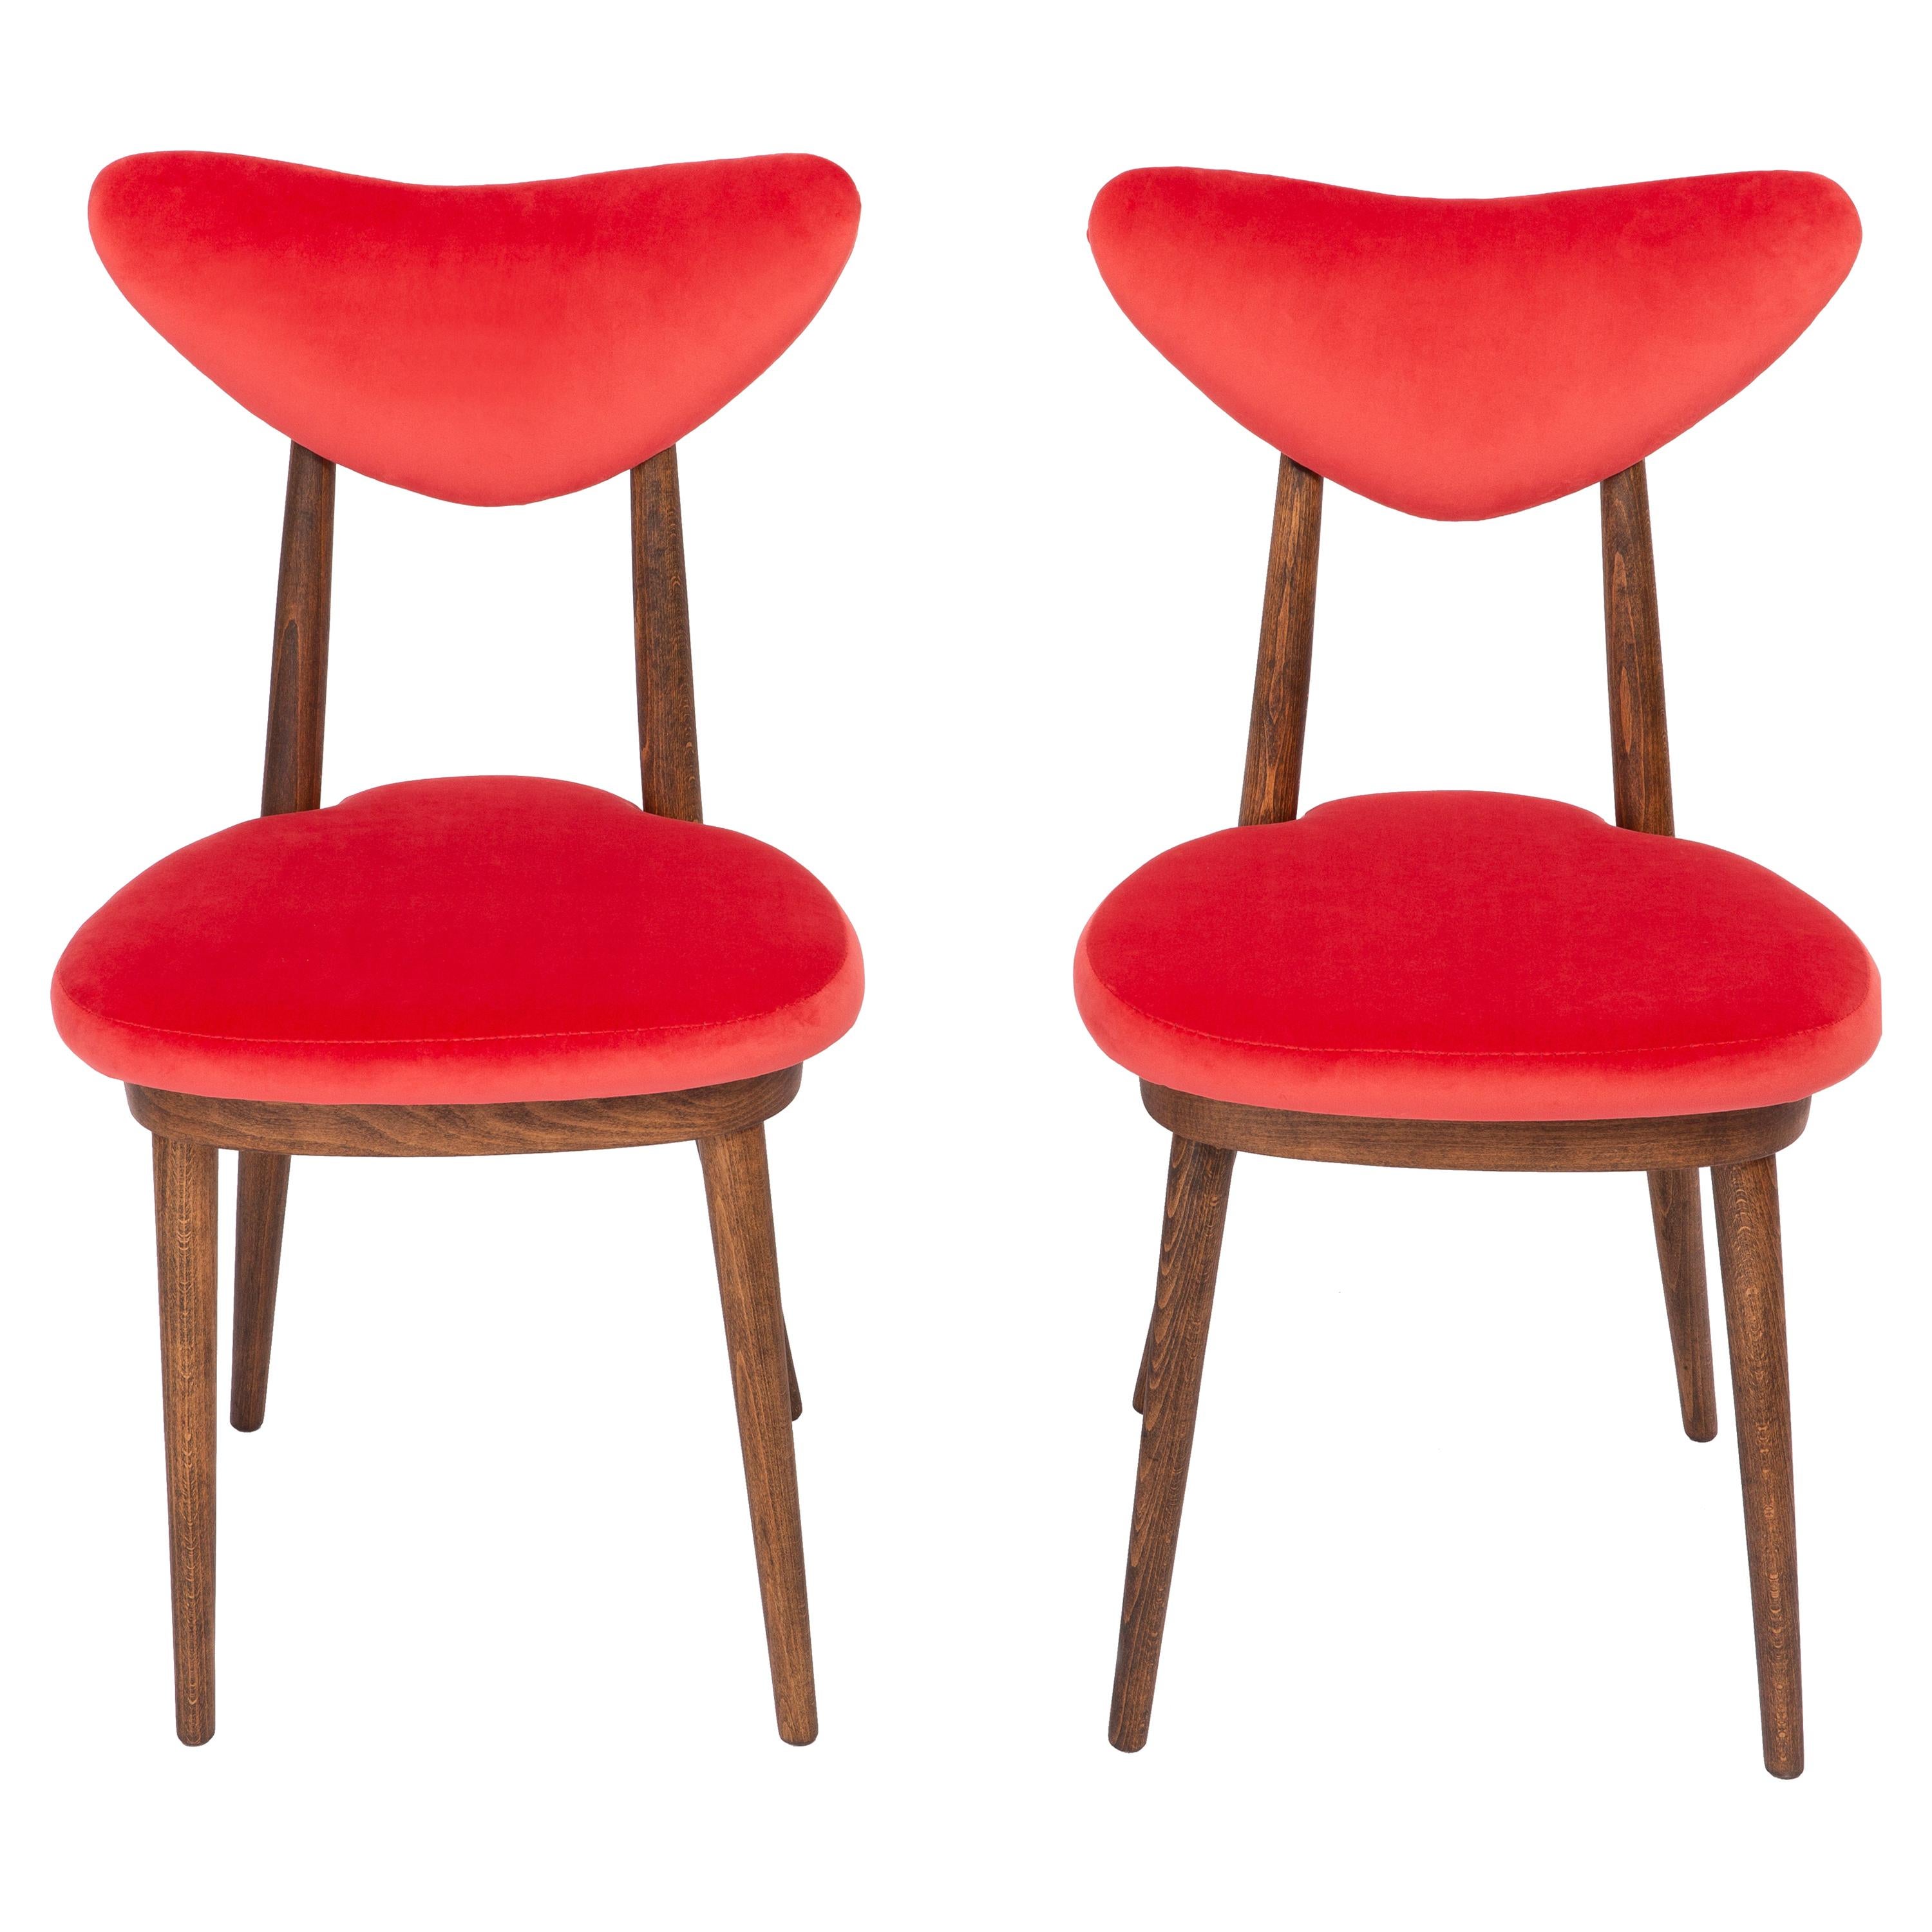 Pair of Red Heart Chairs, Poland, 1960s For Sale